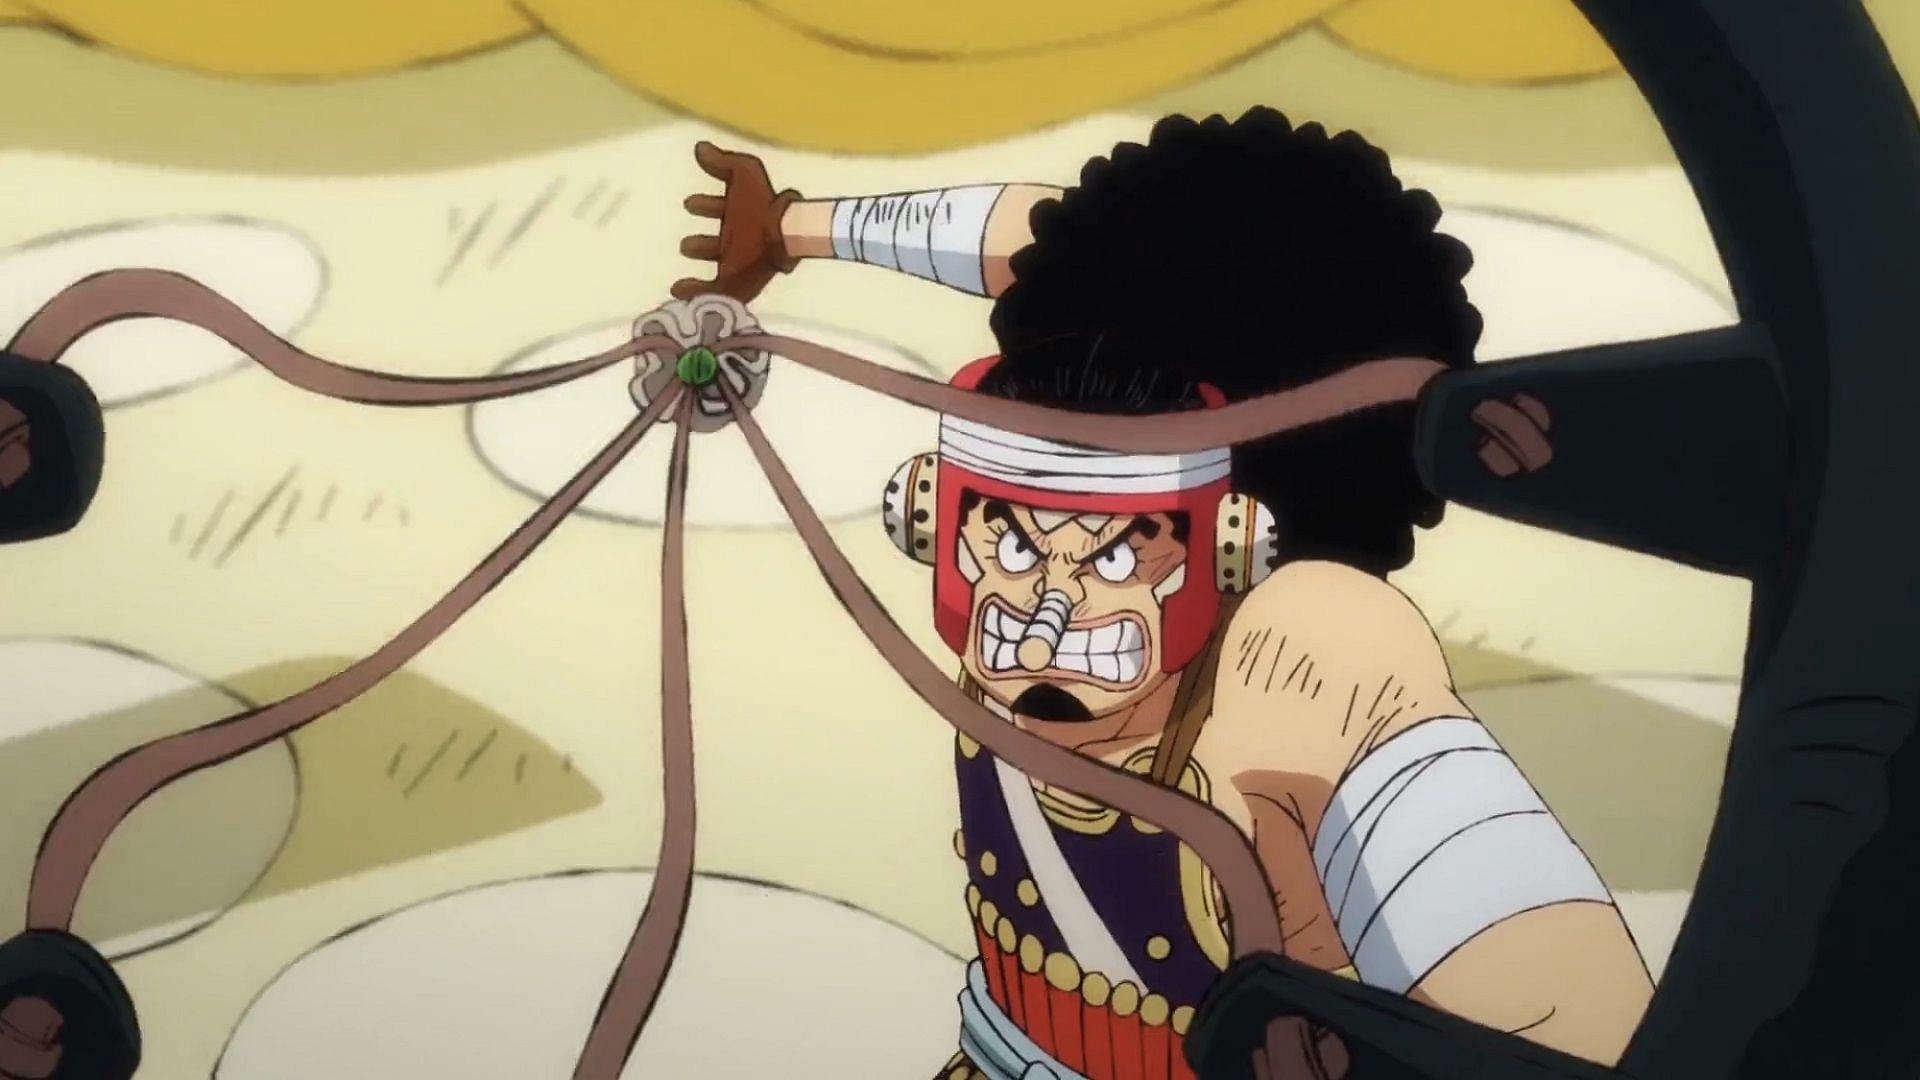 Why will fans be disappointed with the ending of One Piece?